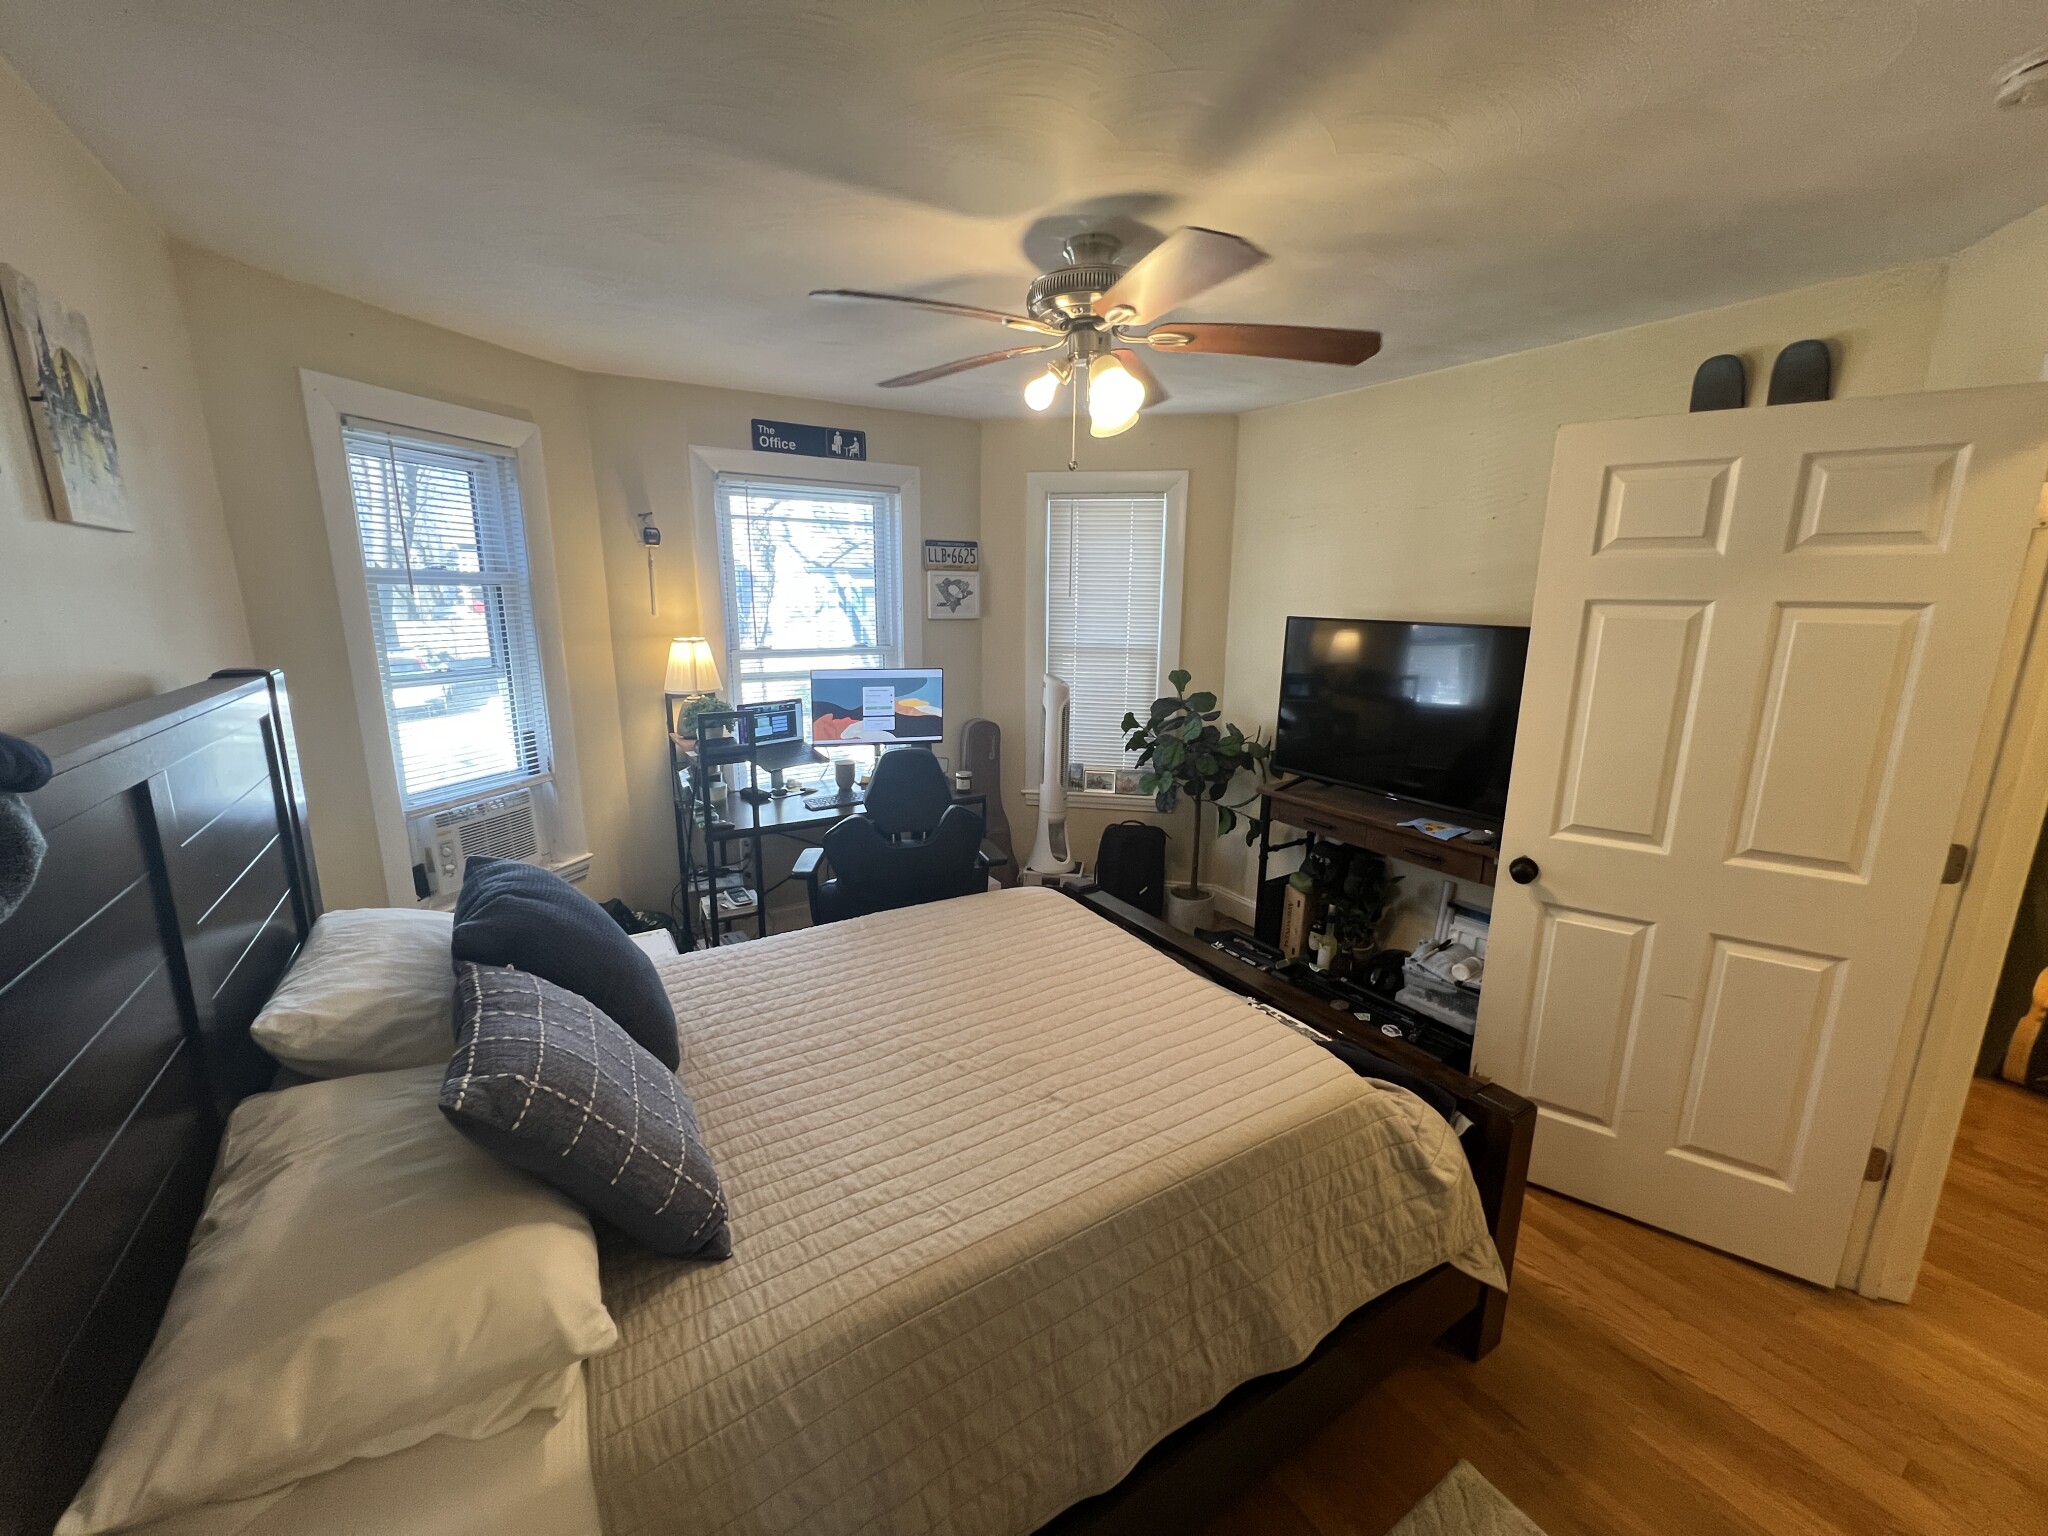 Photos of apartment on Chandler St.,Somerville MA 02144